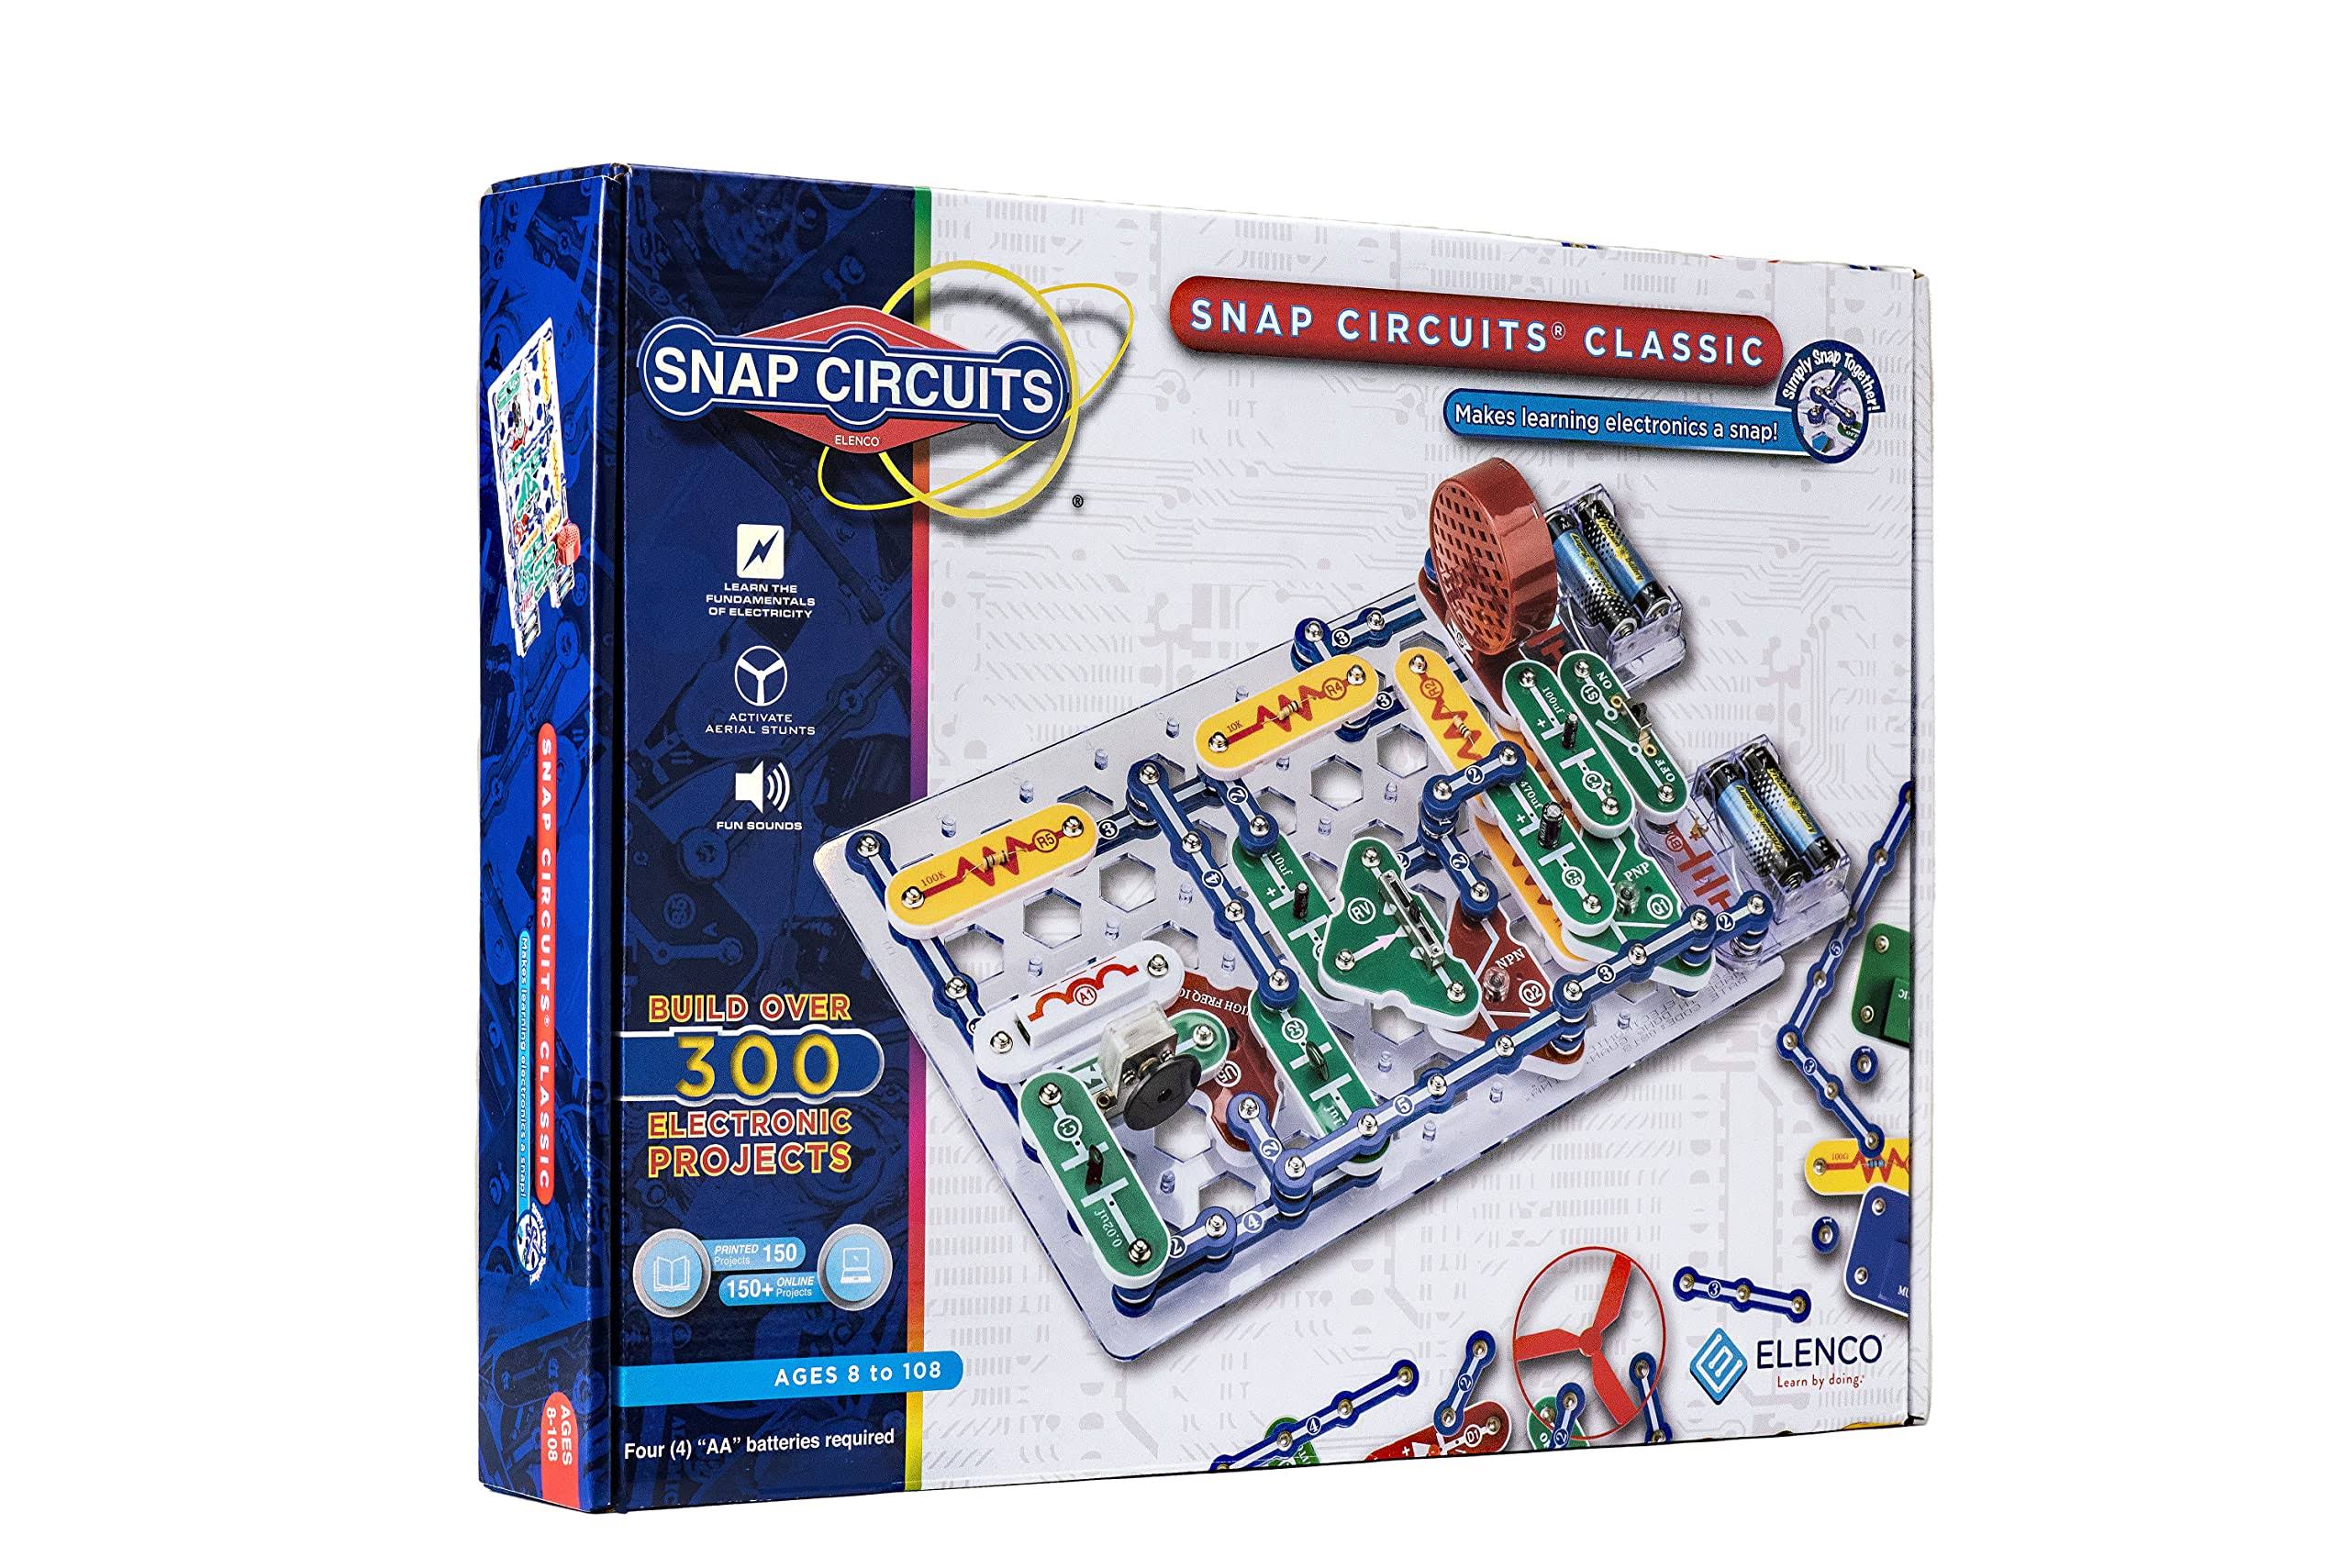 Electronic Snap Circuits Board Game